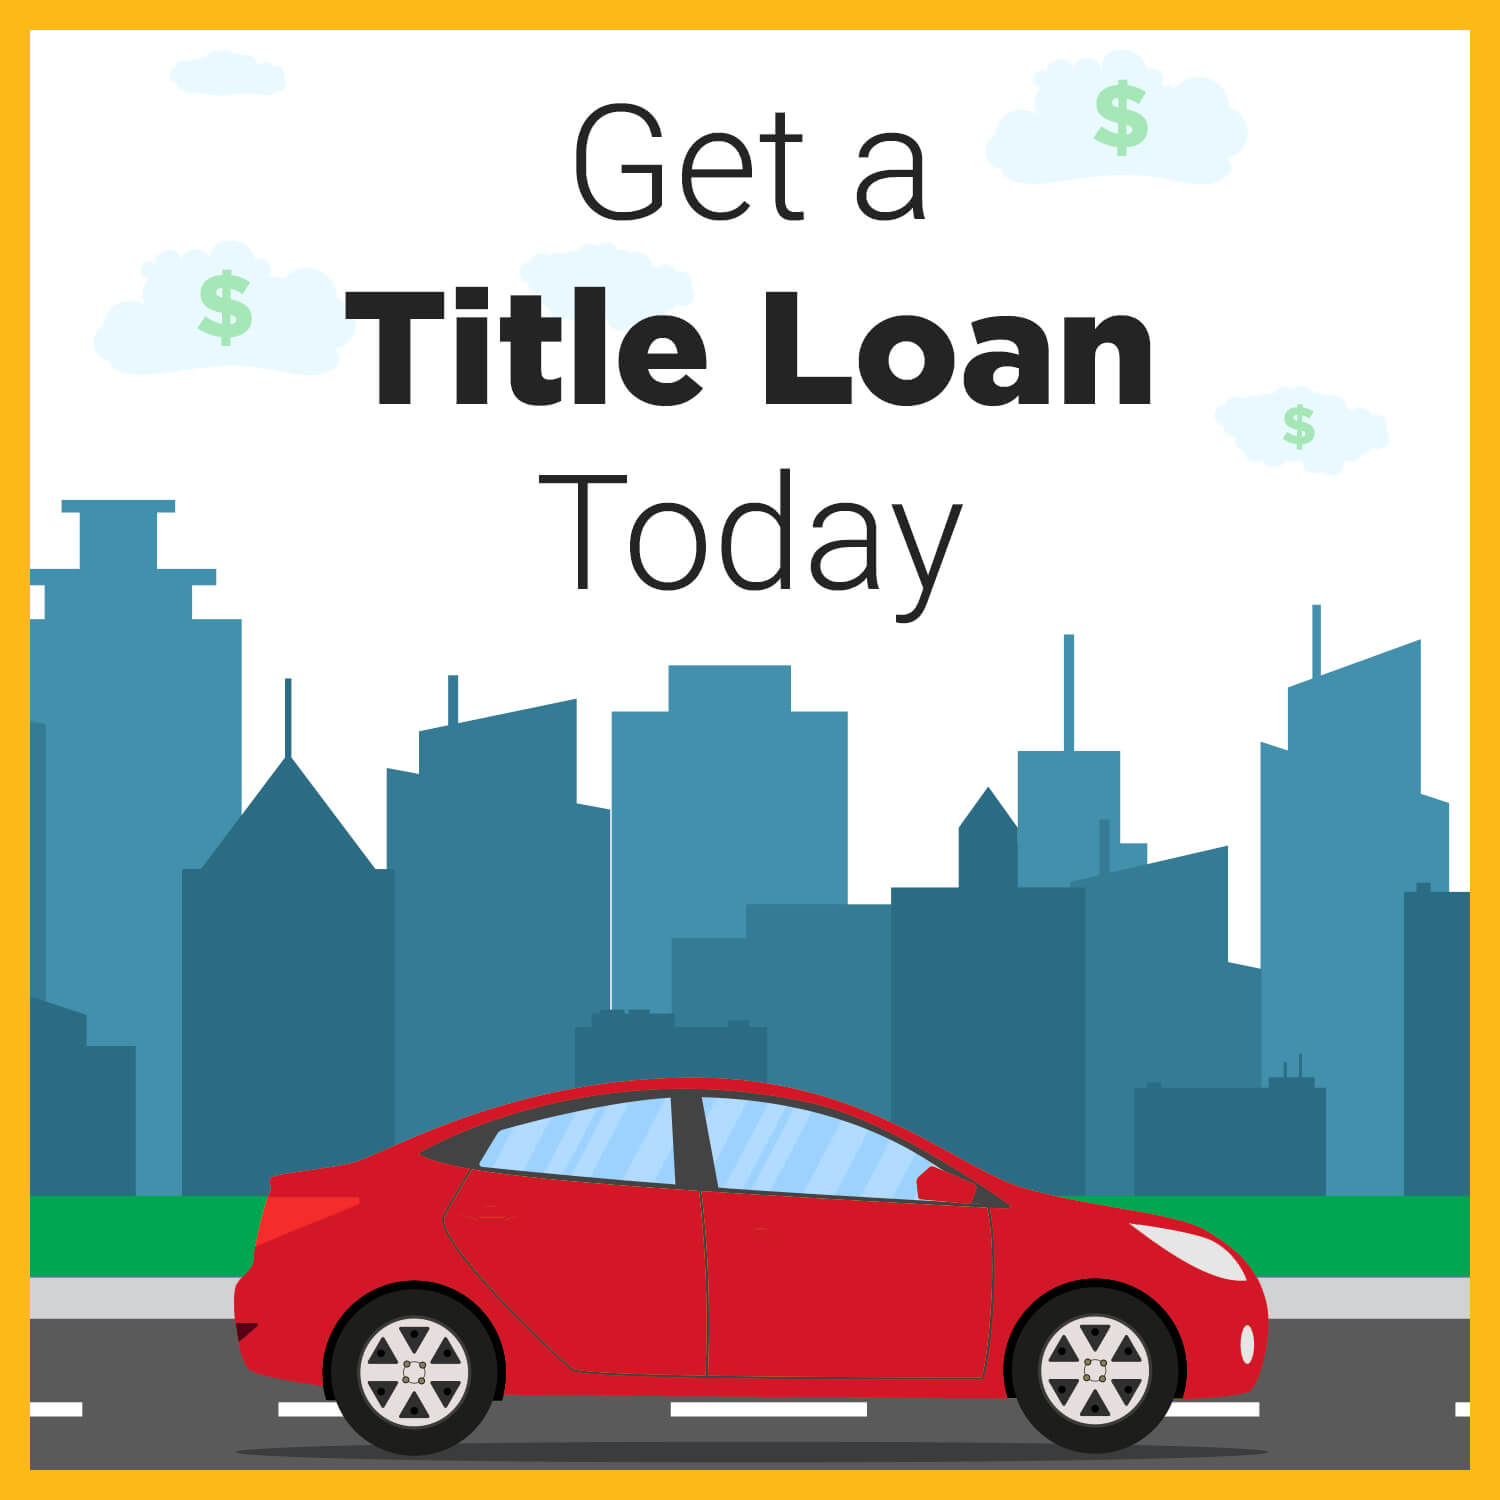 qualify through simple title loan requirements